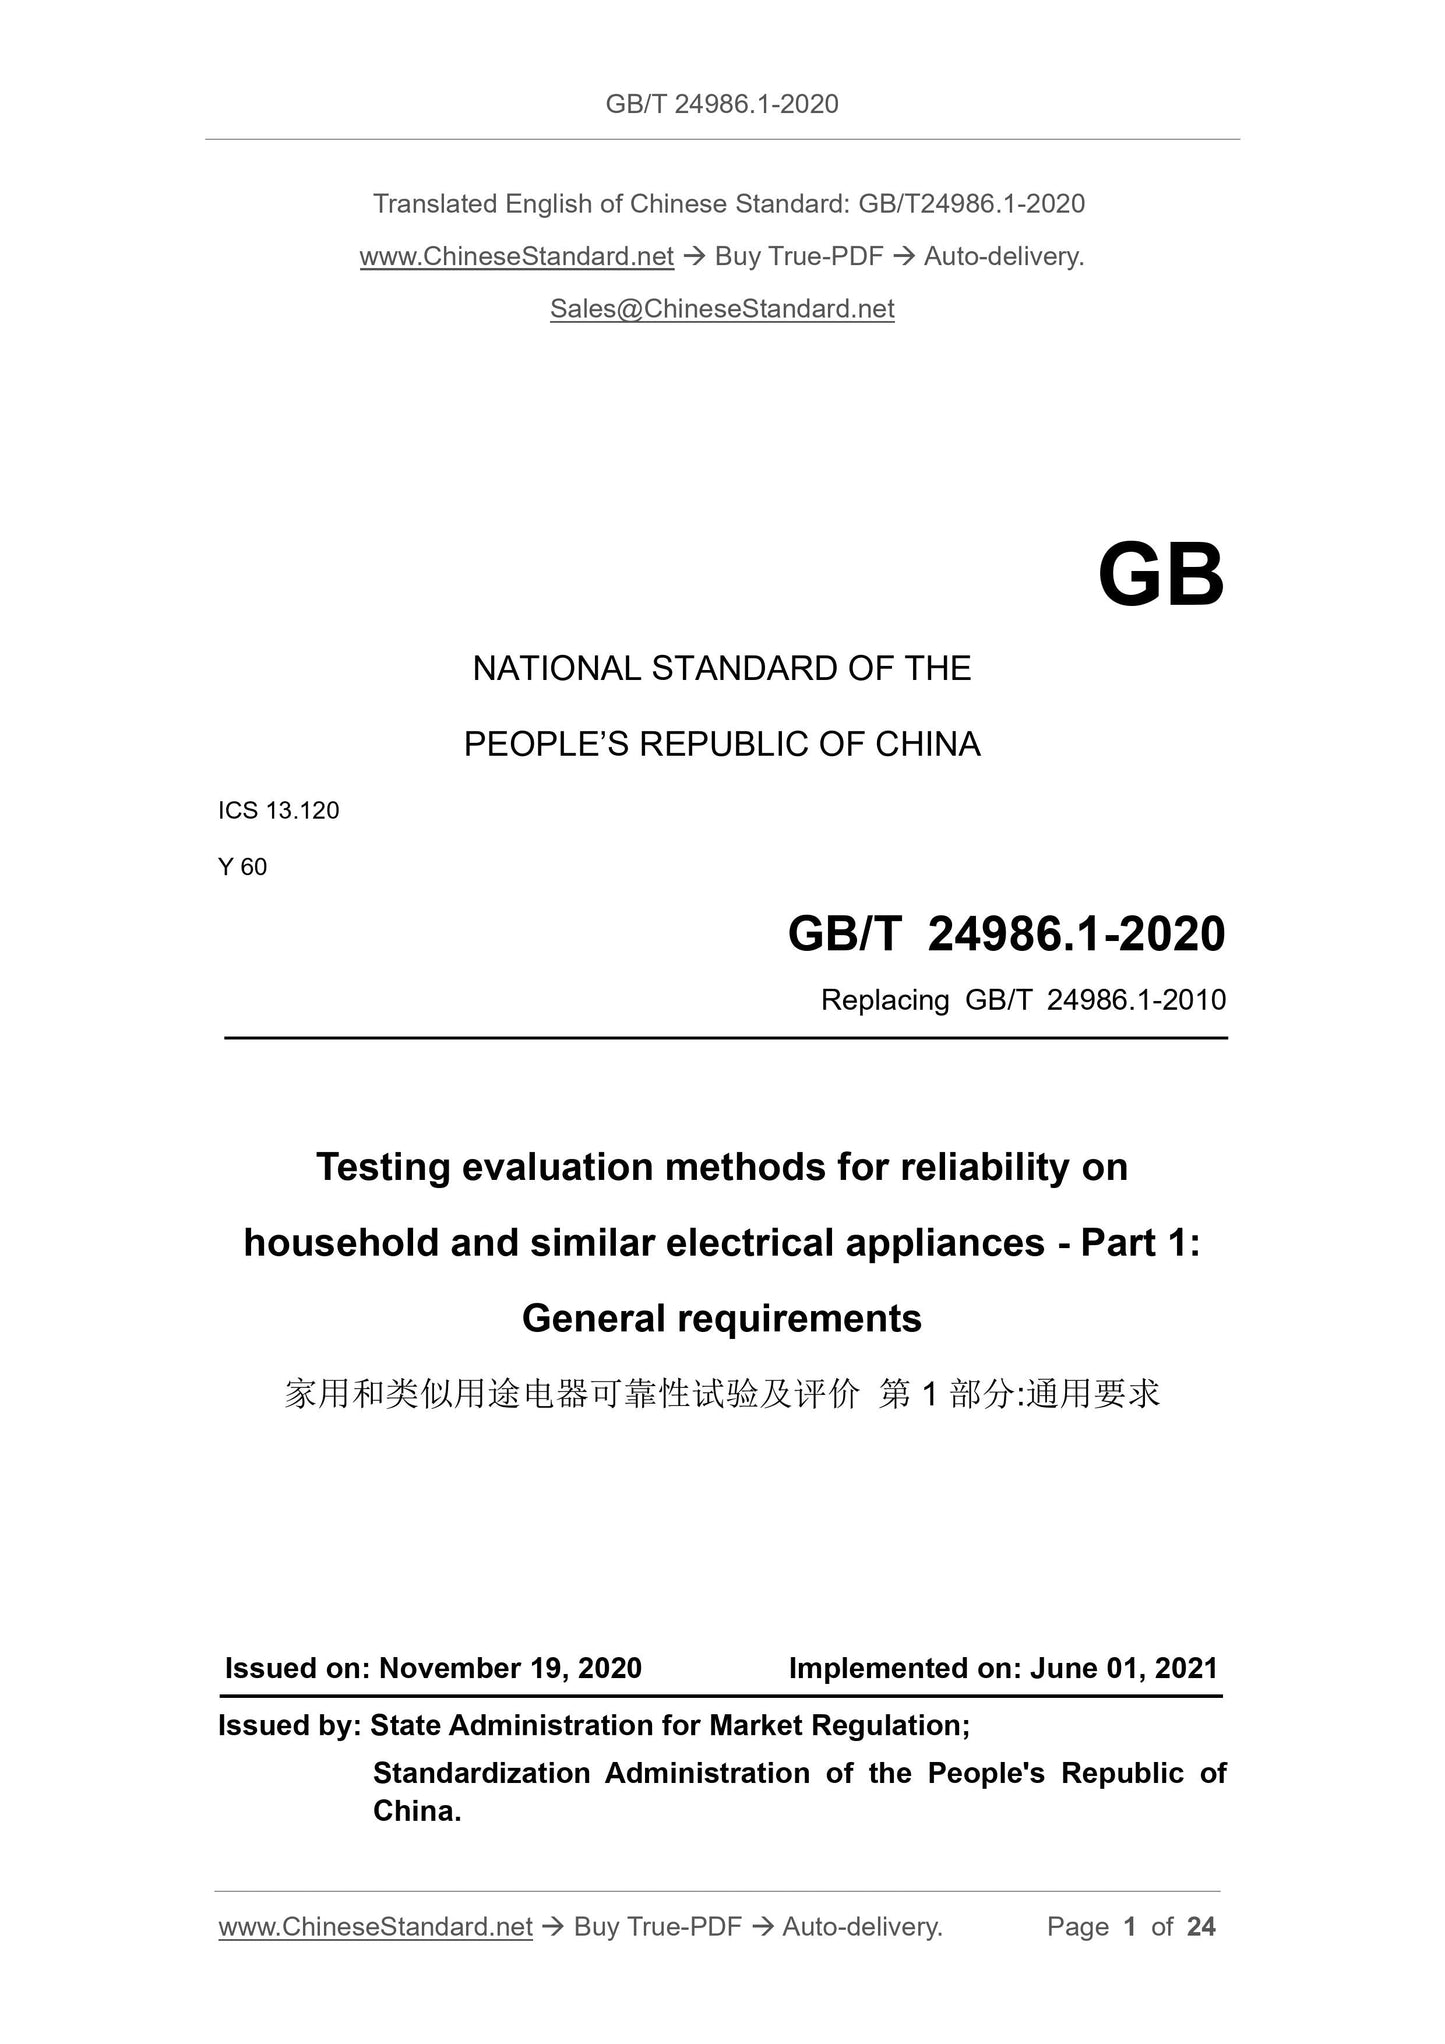 GB/T 24986.1-2020 Page 1